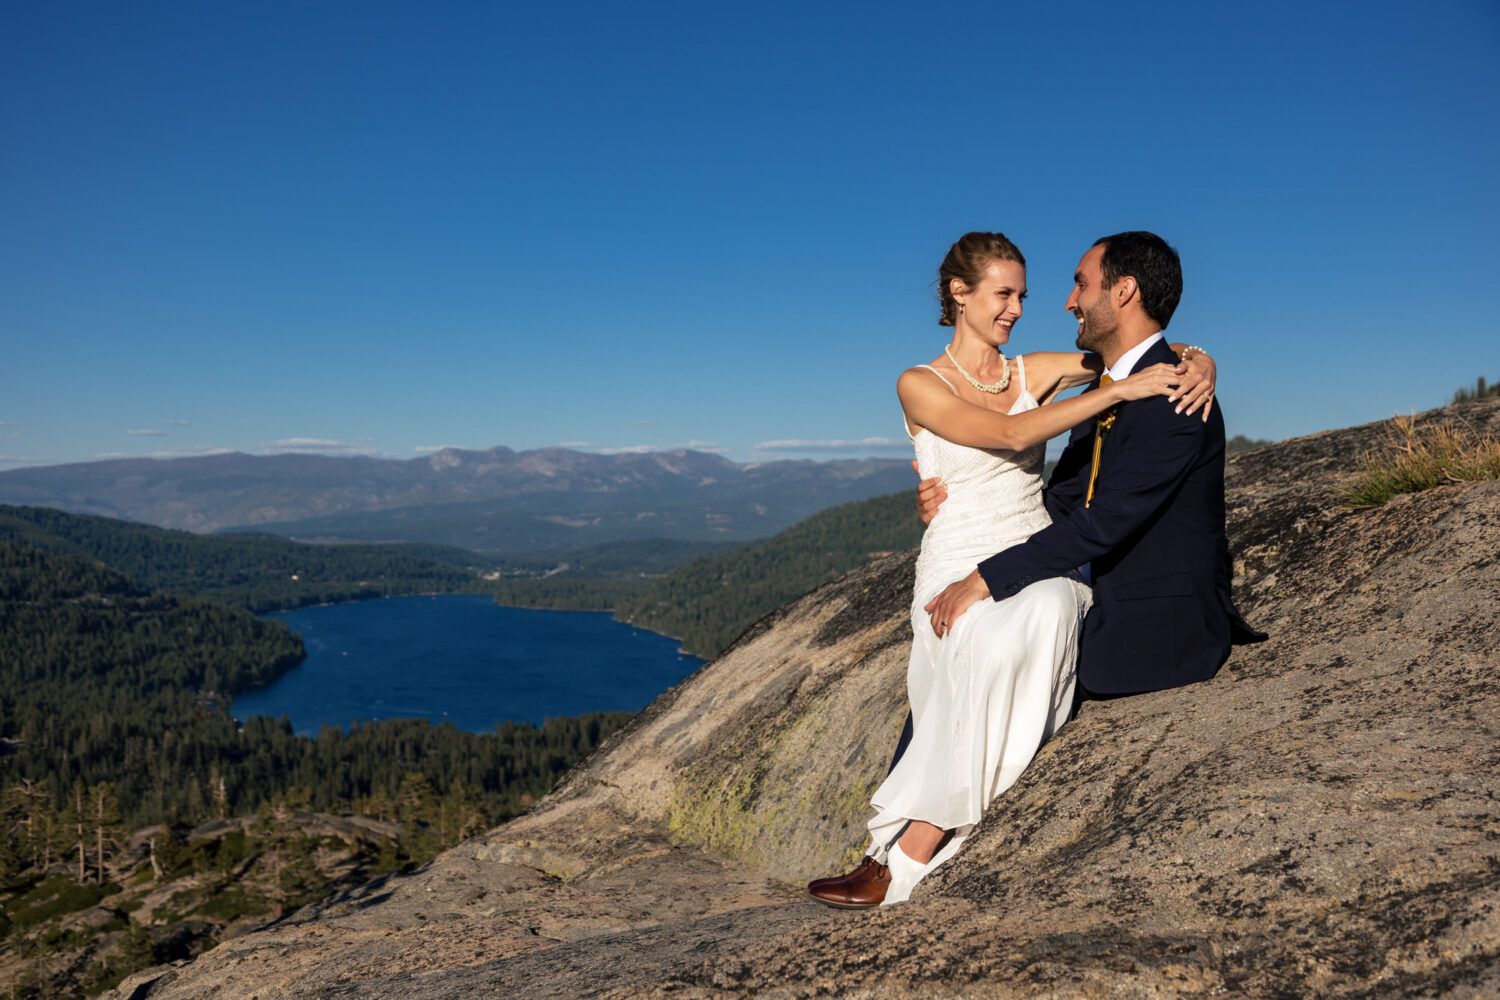 Bride seated in the groom's lap during their Donner Summit wedding photos.